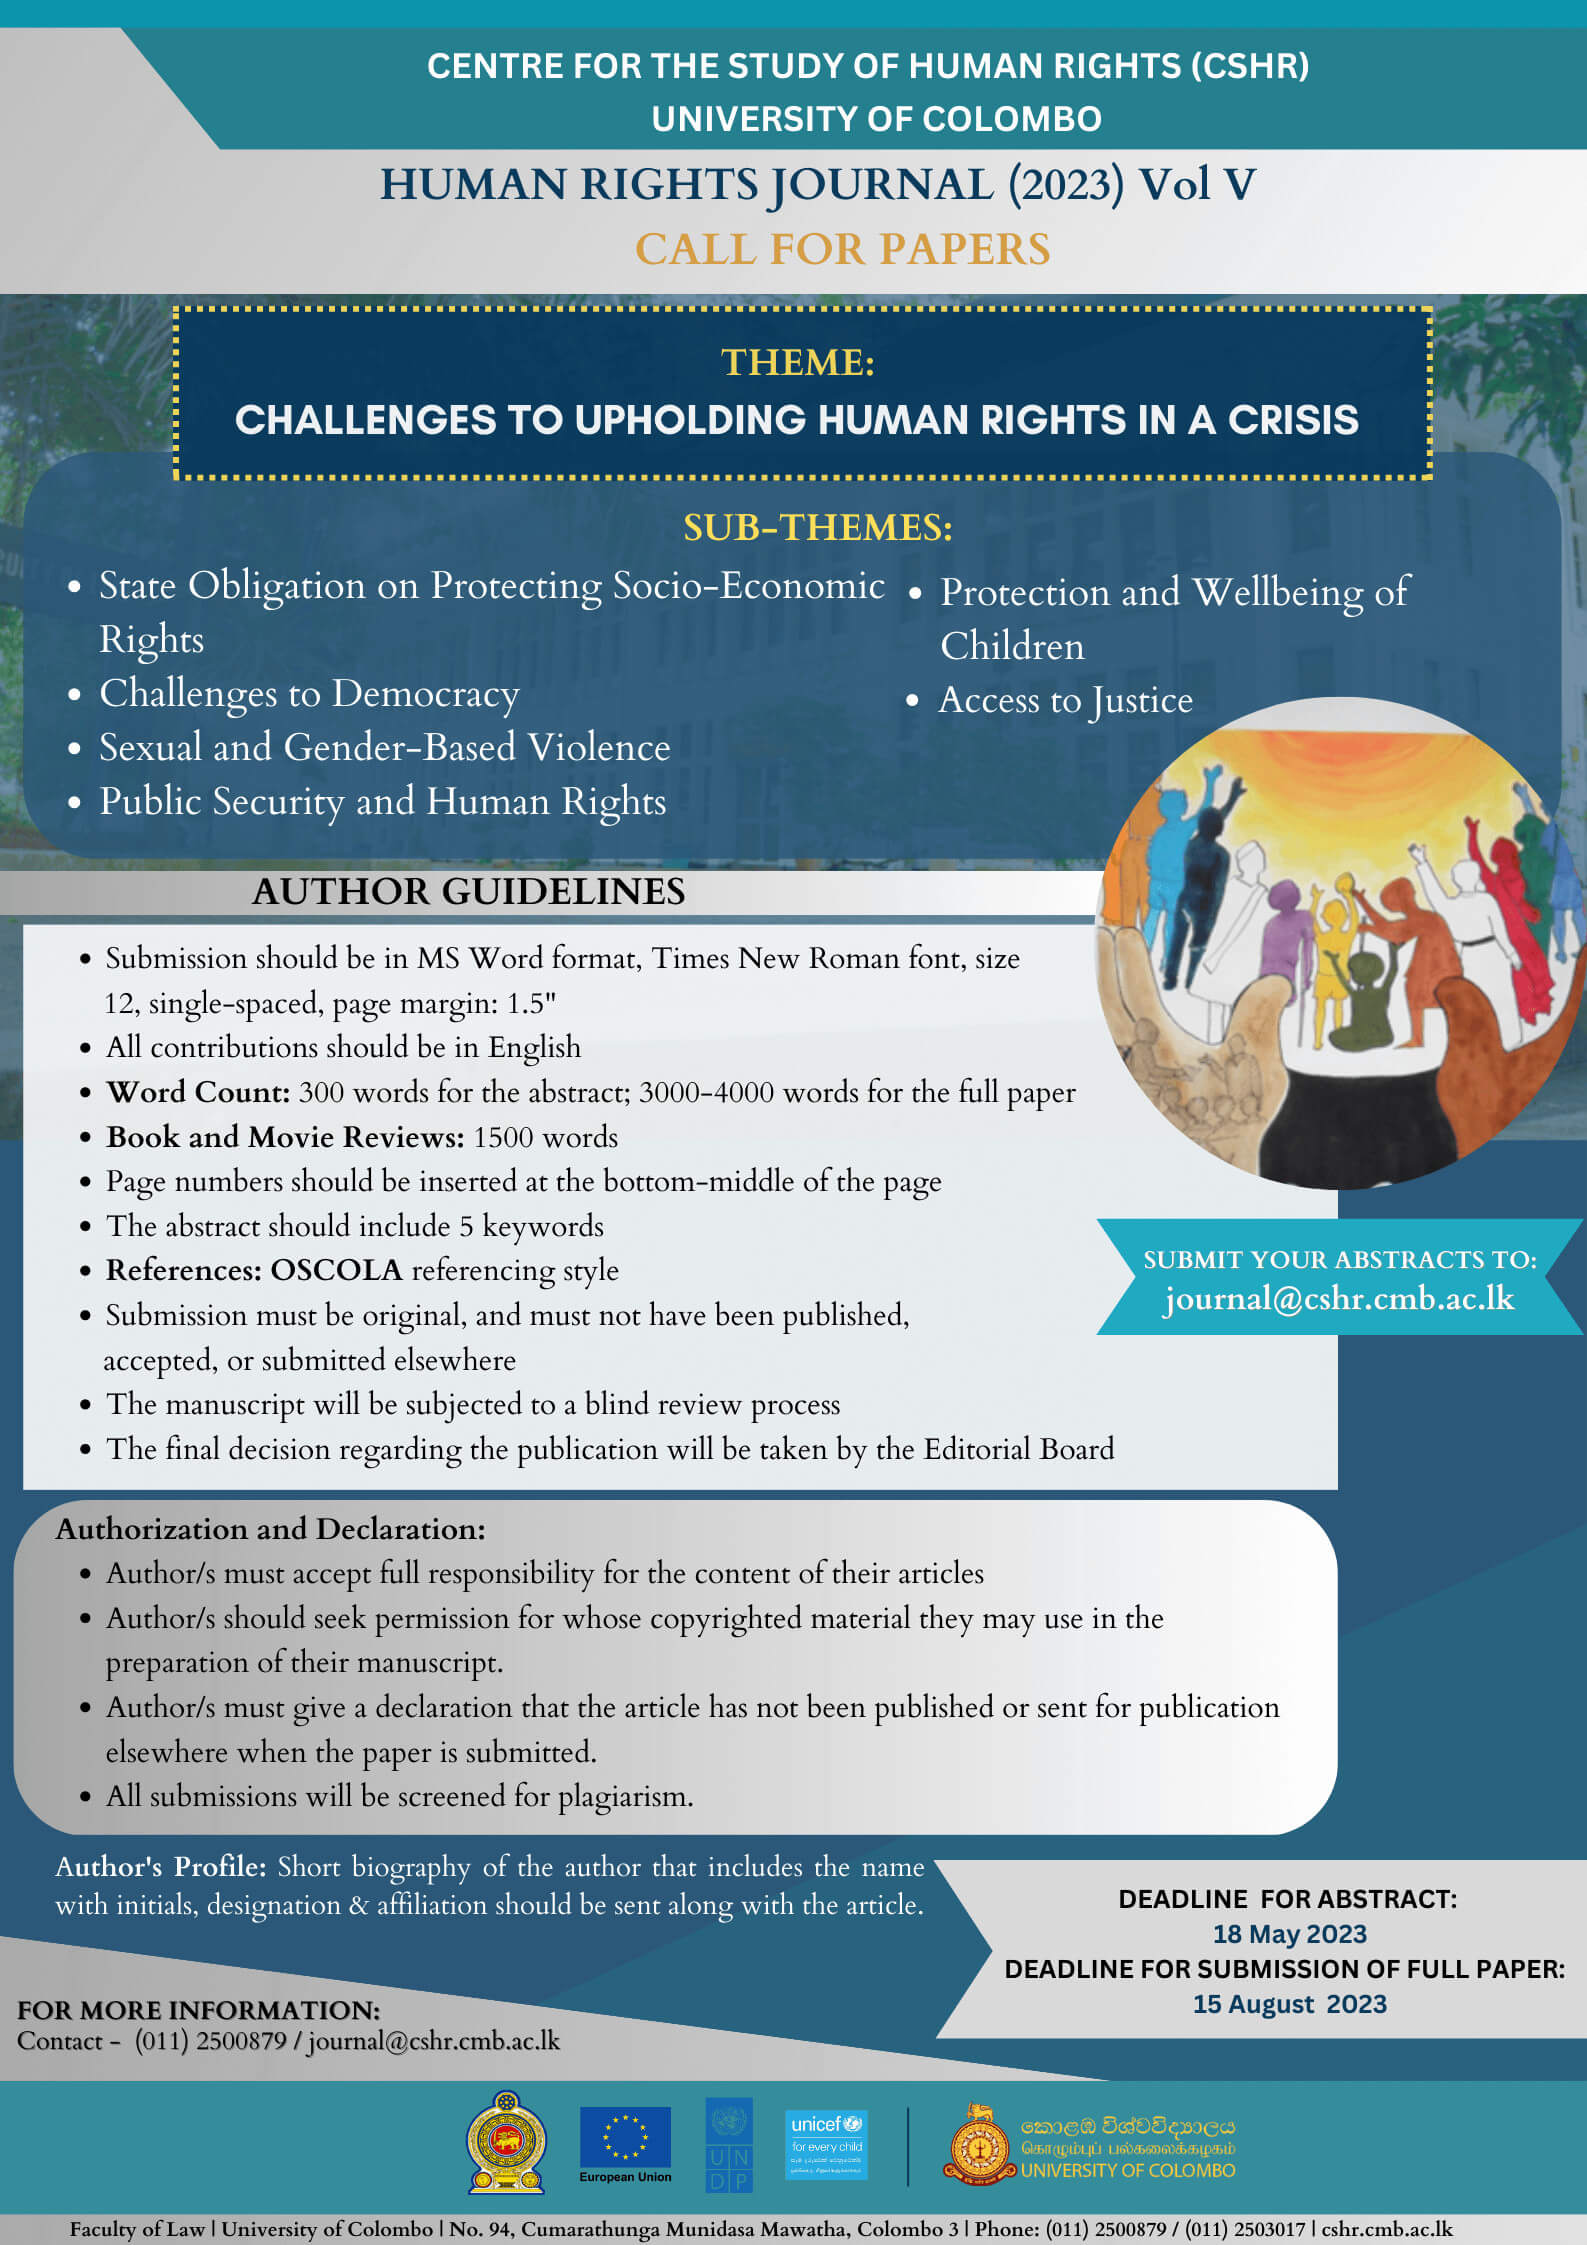 CALL FOR PAPERS – HUMAN RIGHTS JOURNAL (2023) Vol V